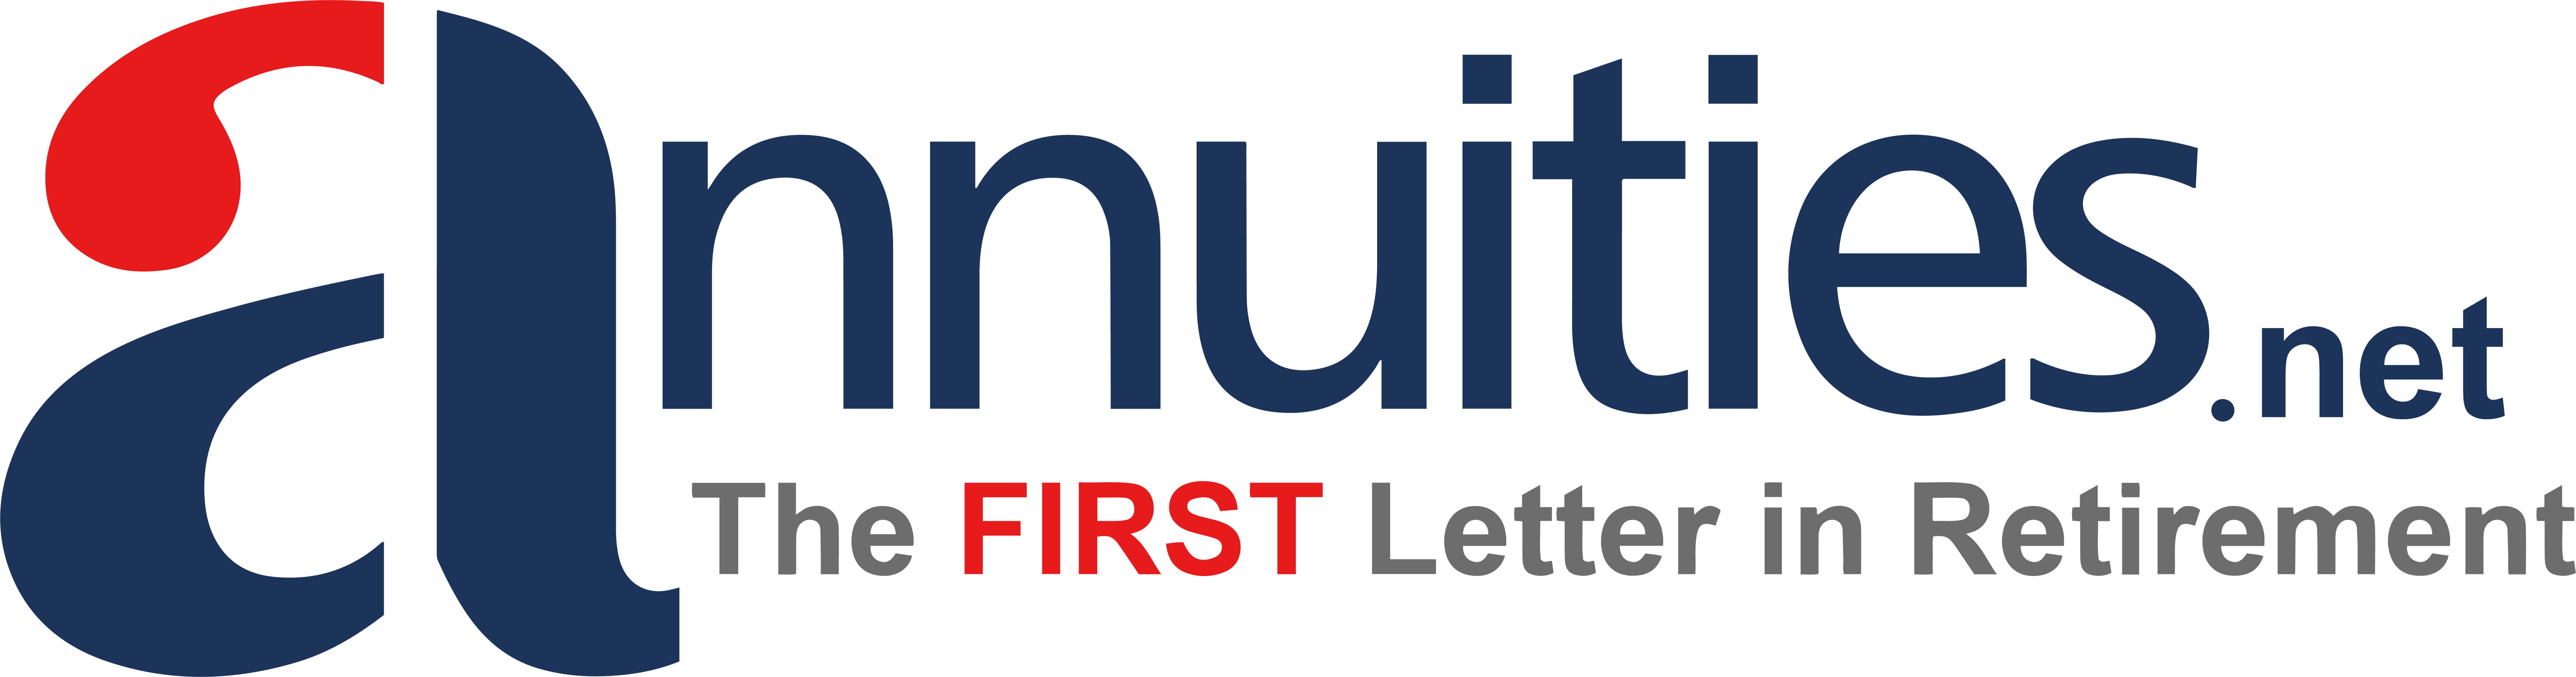 Annuities.net - Free Annuity Rate Quotes